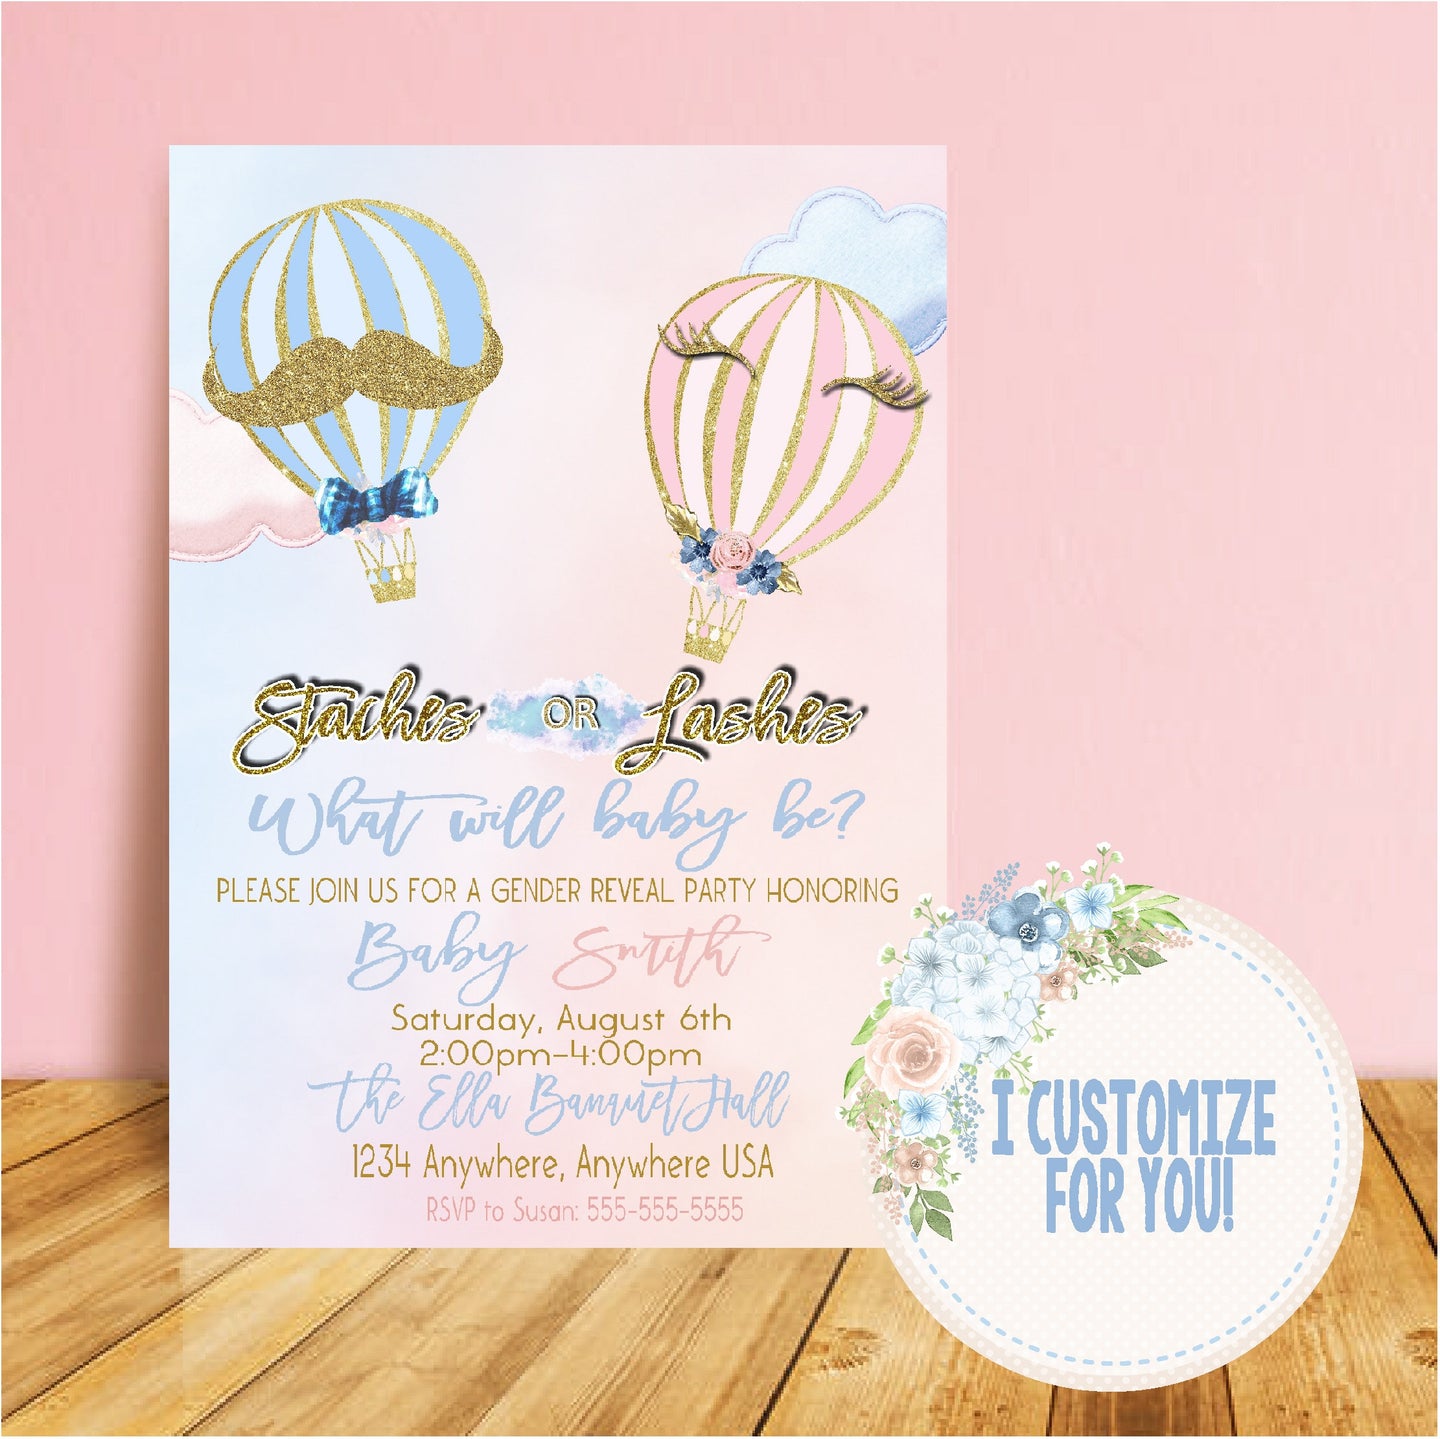 Hot air Balloon Gender Reveal  Invitation, staches or lashes, adventure awaits, Invite blue or pink  printable,   gold Glitter, 1114